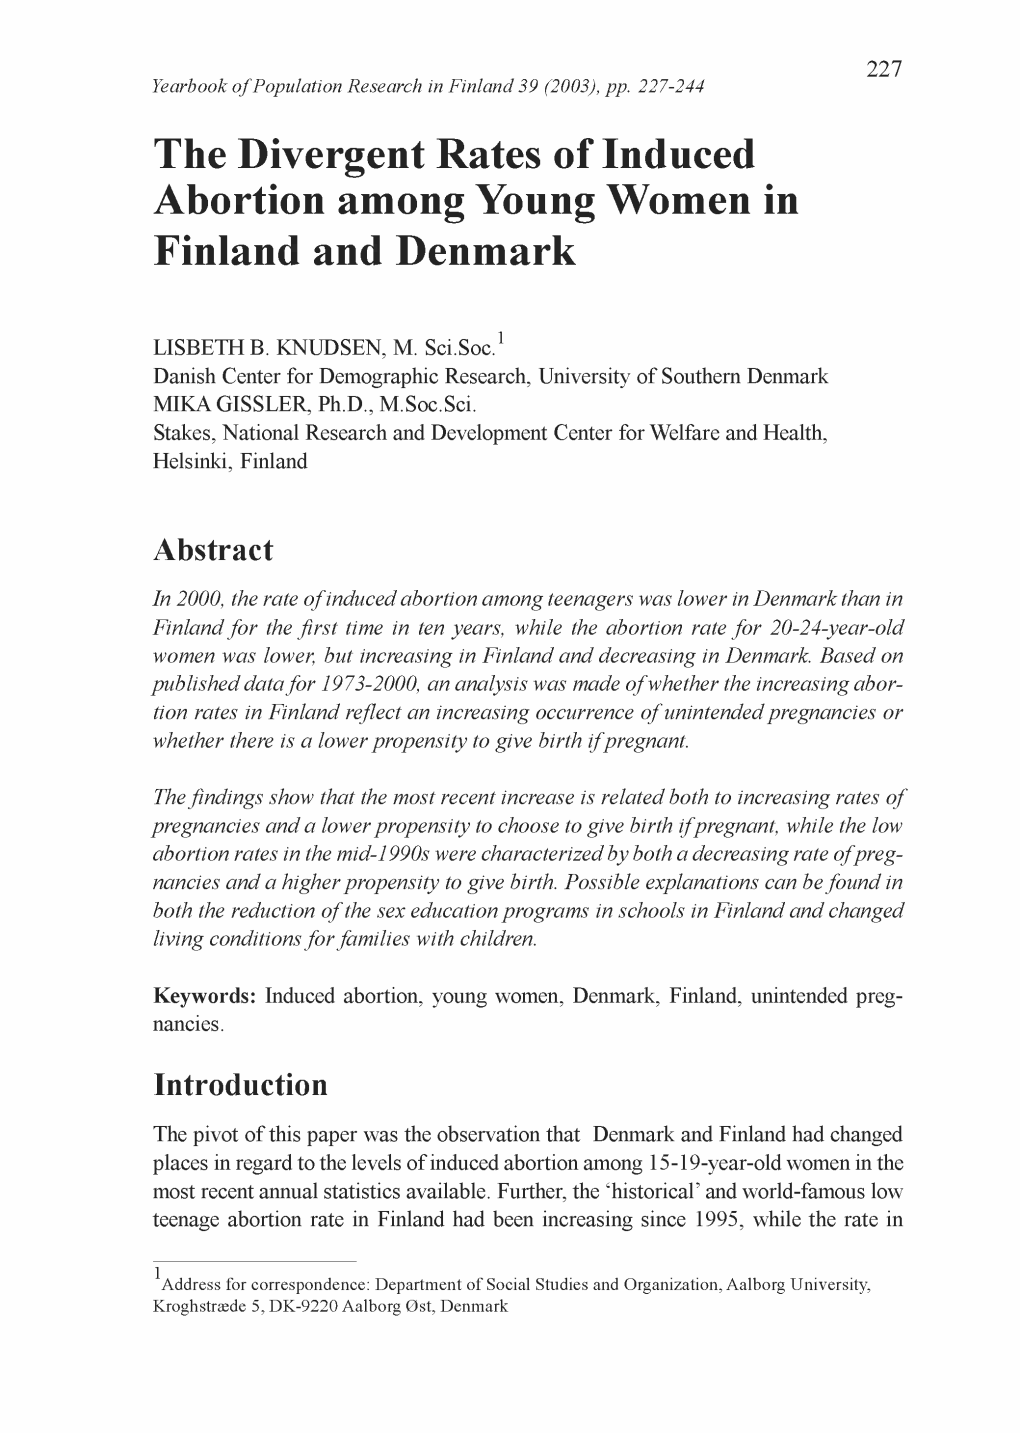 The Divergent Rates of Induced Abortion Among Young Women in Finland and Denmark